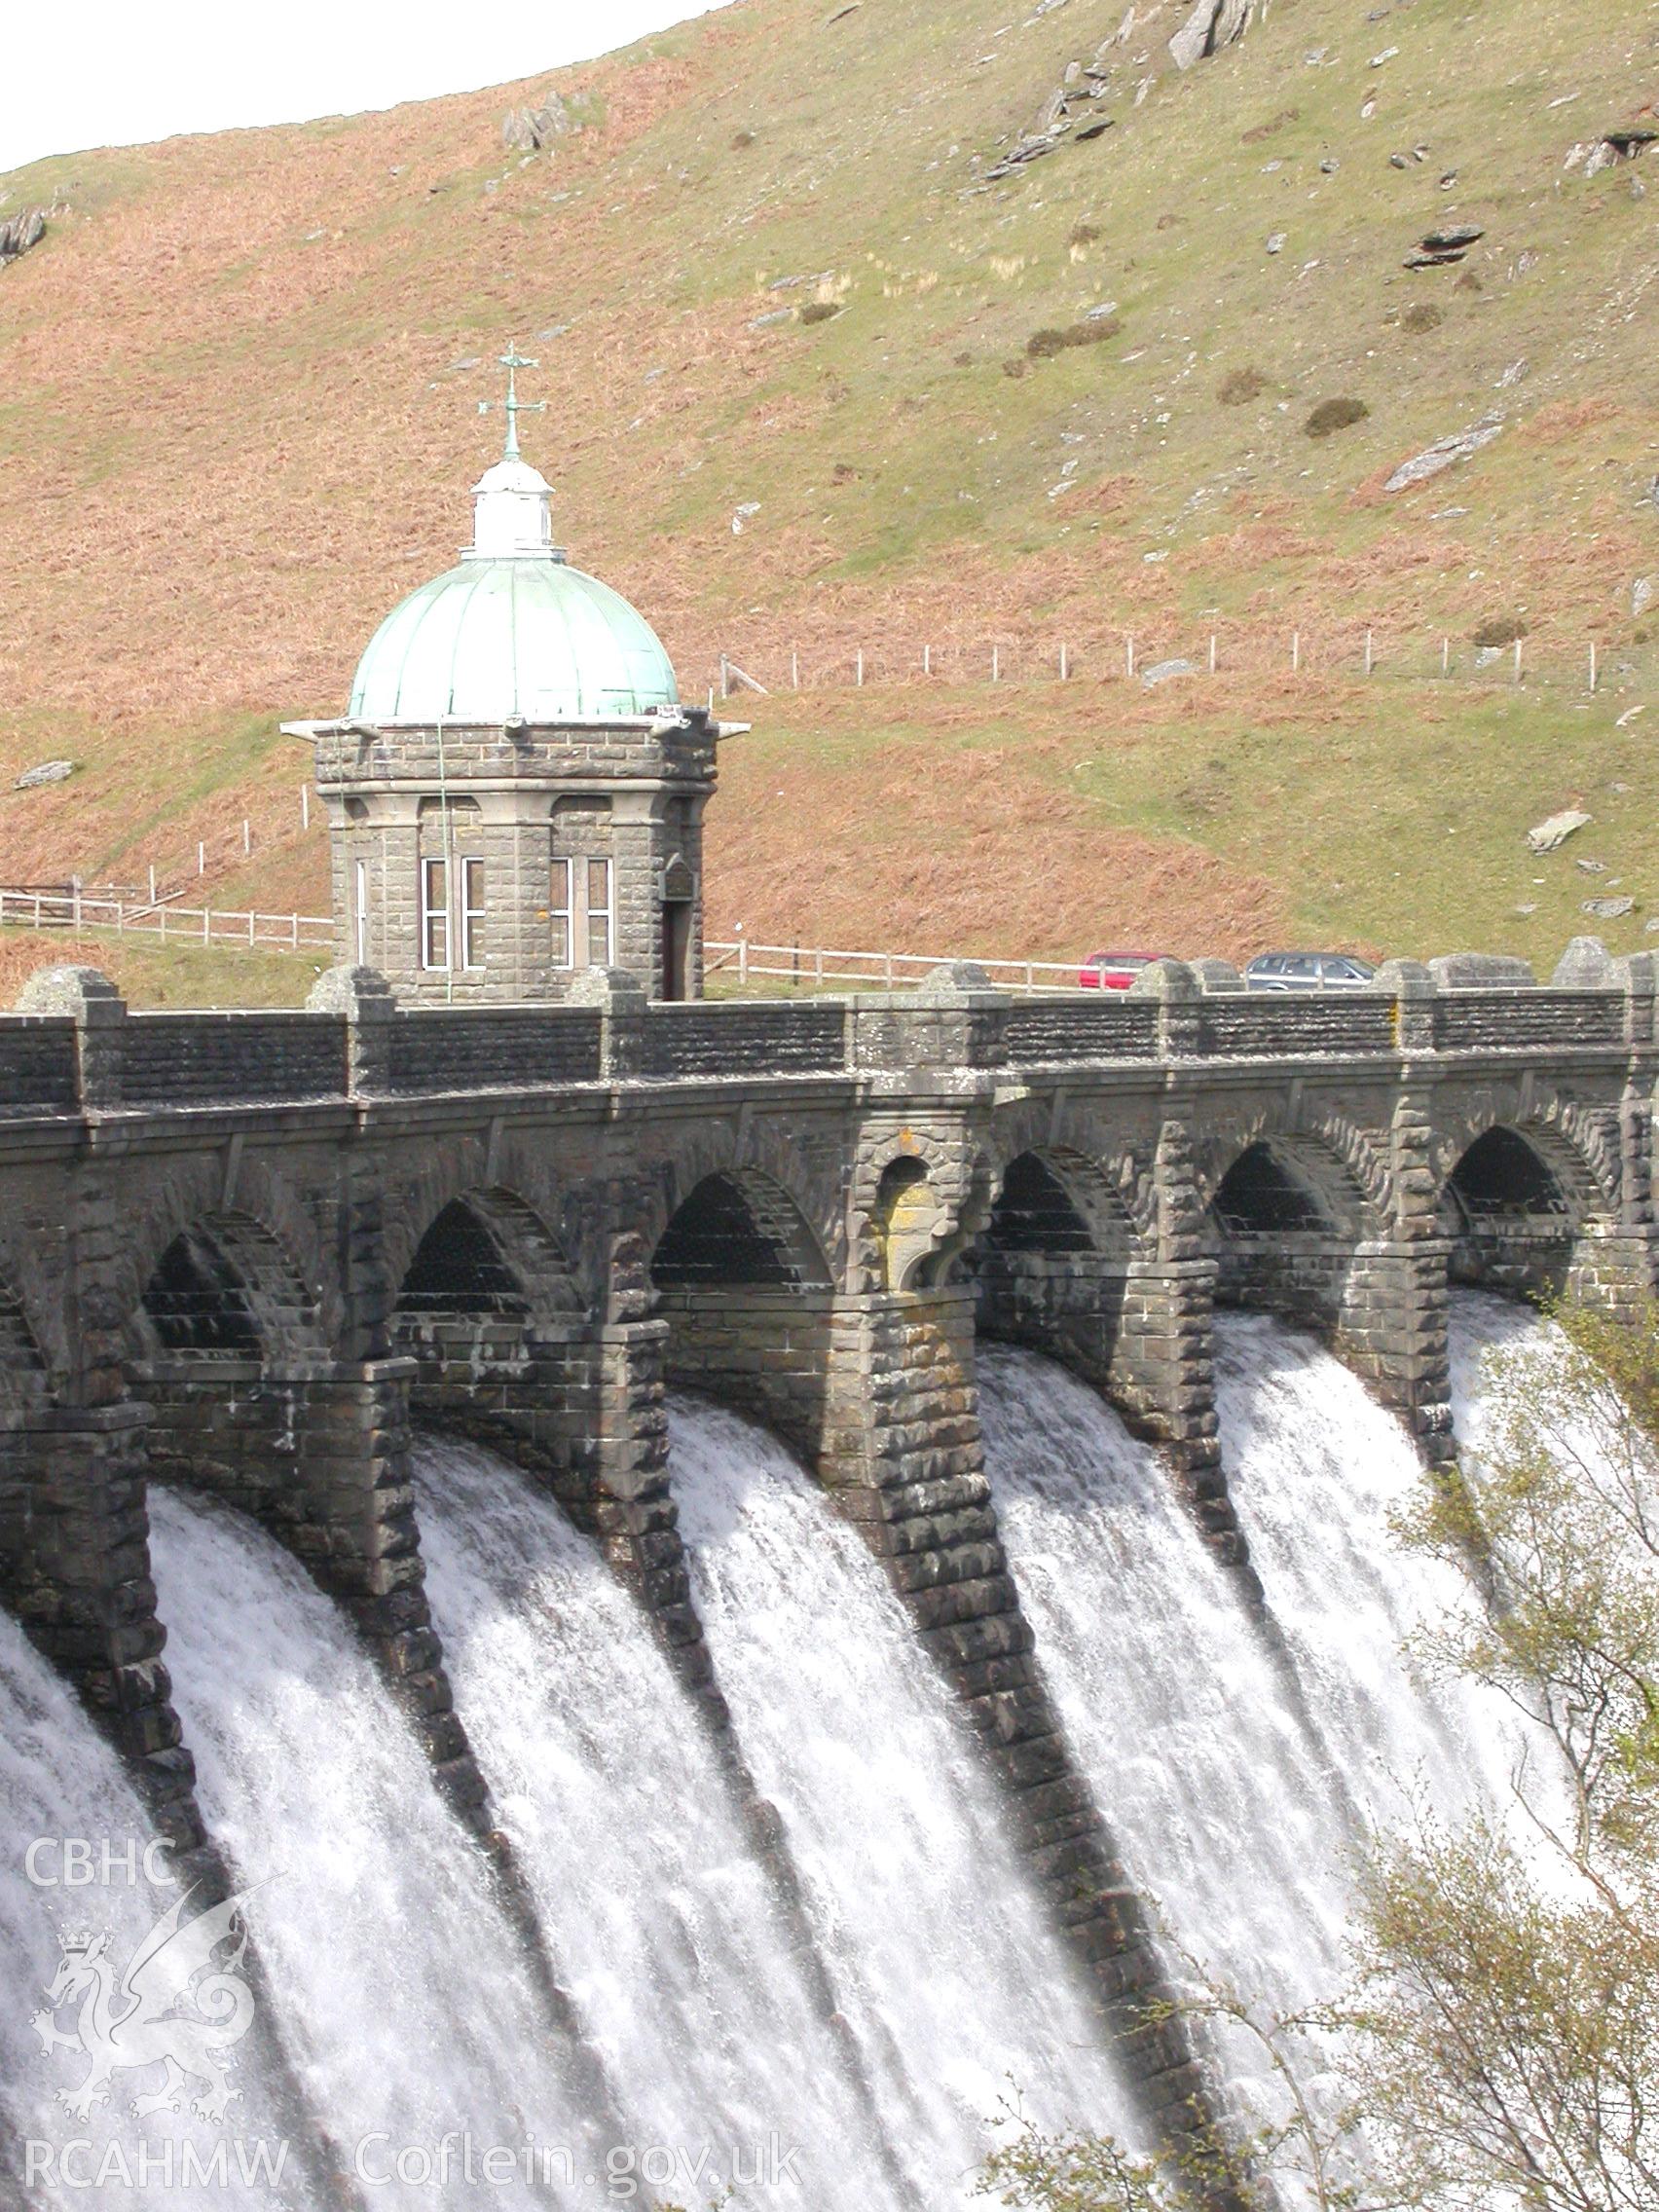 Dam and valve tower with hillside beyond.